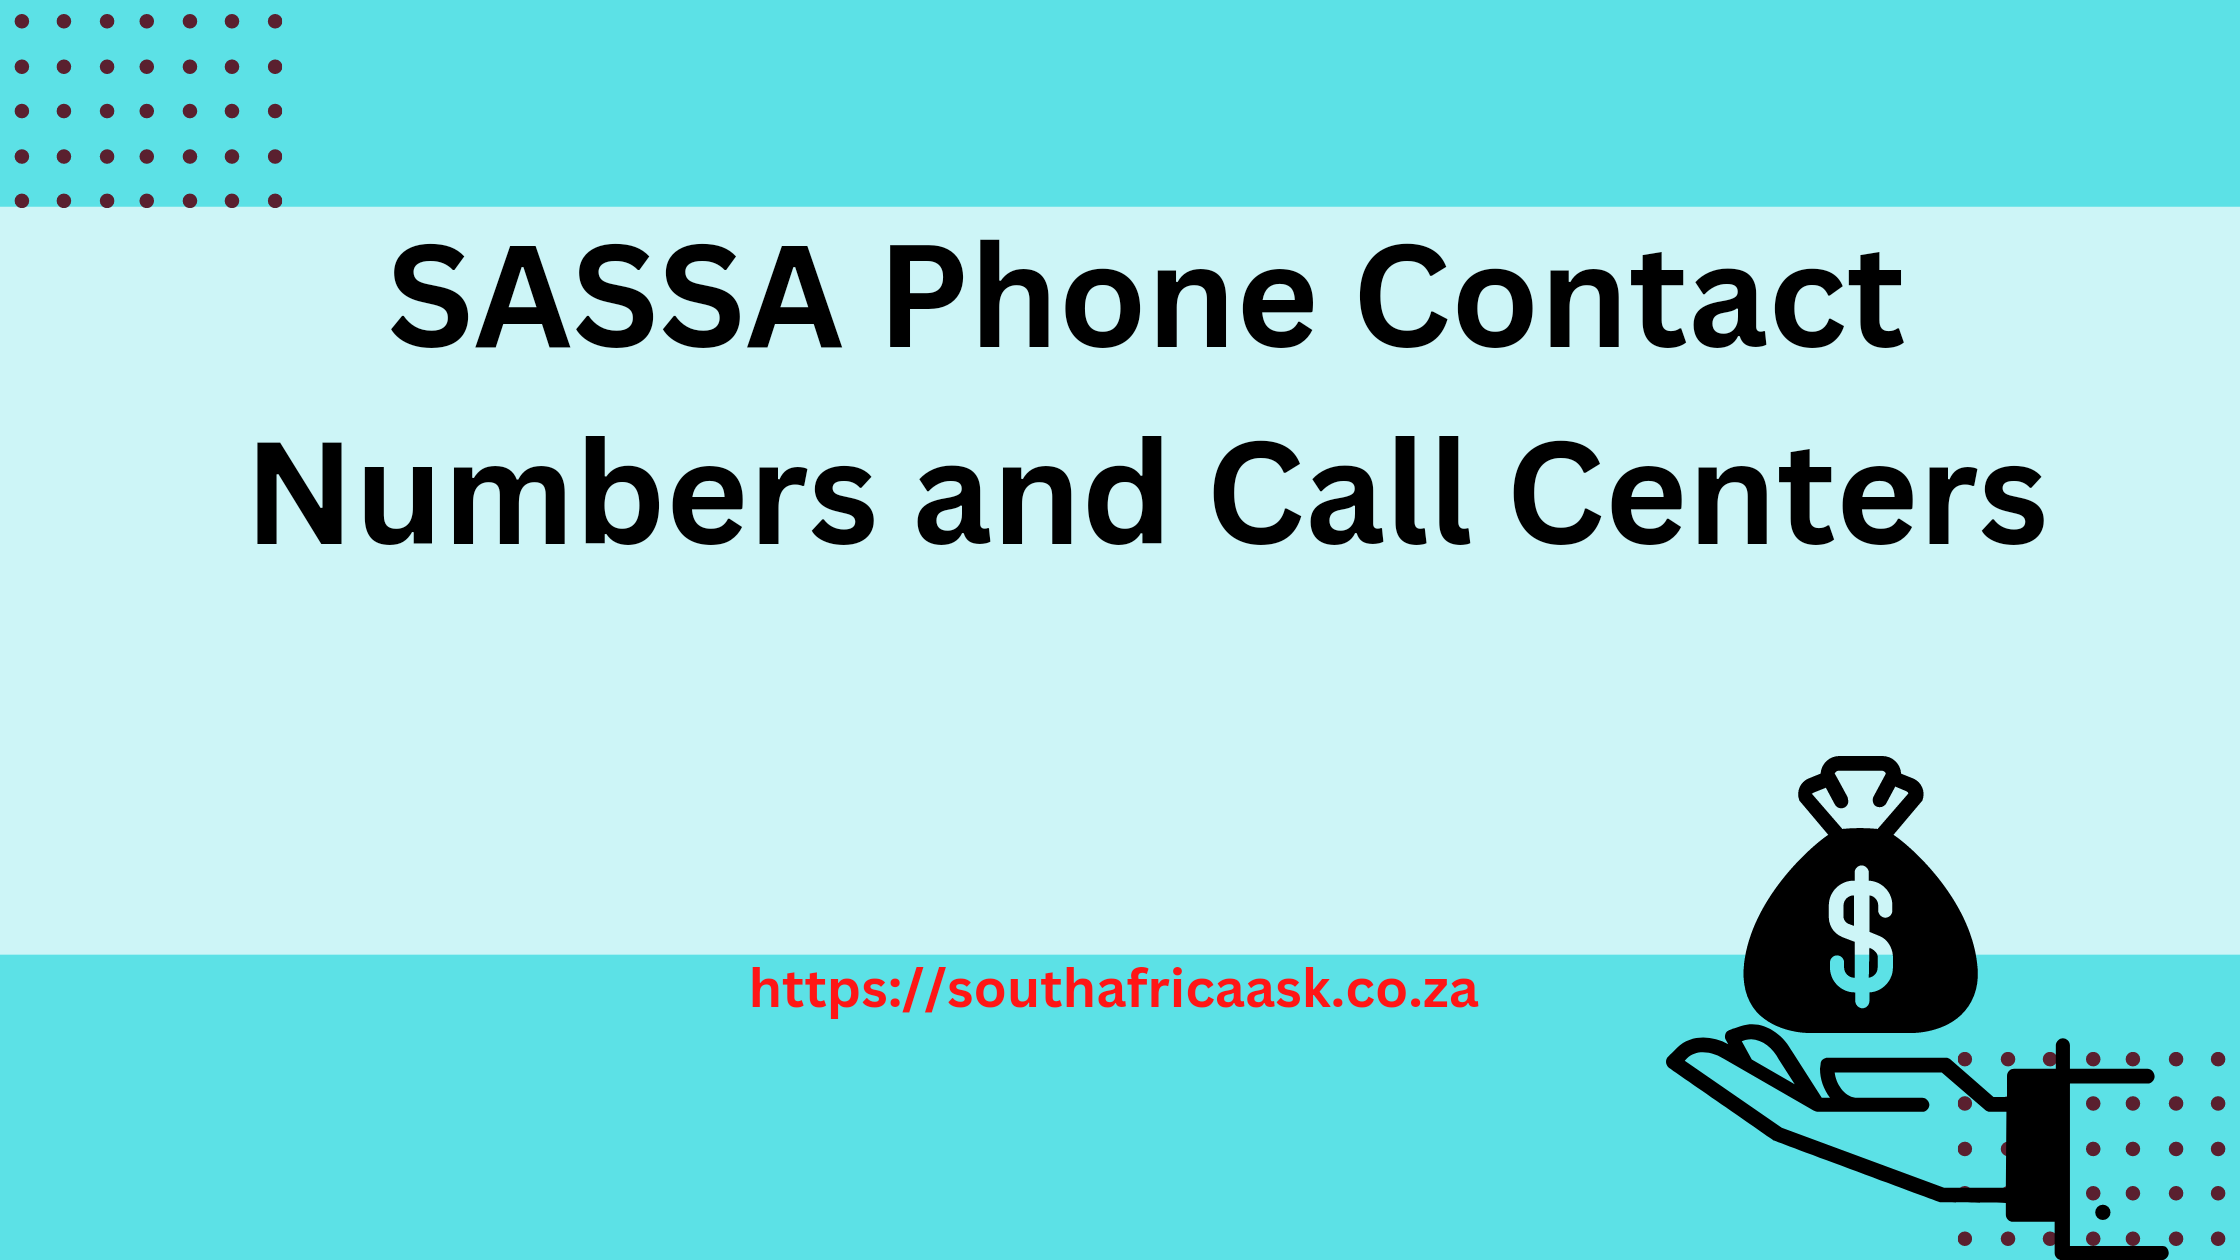 SASSA Phone Contact Numbers and Call Centers